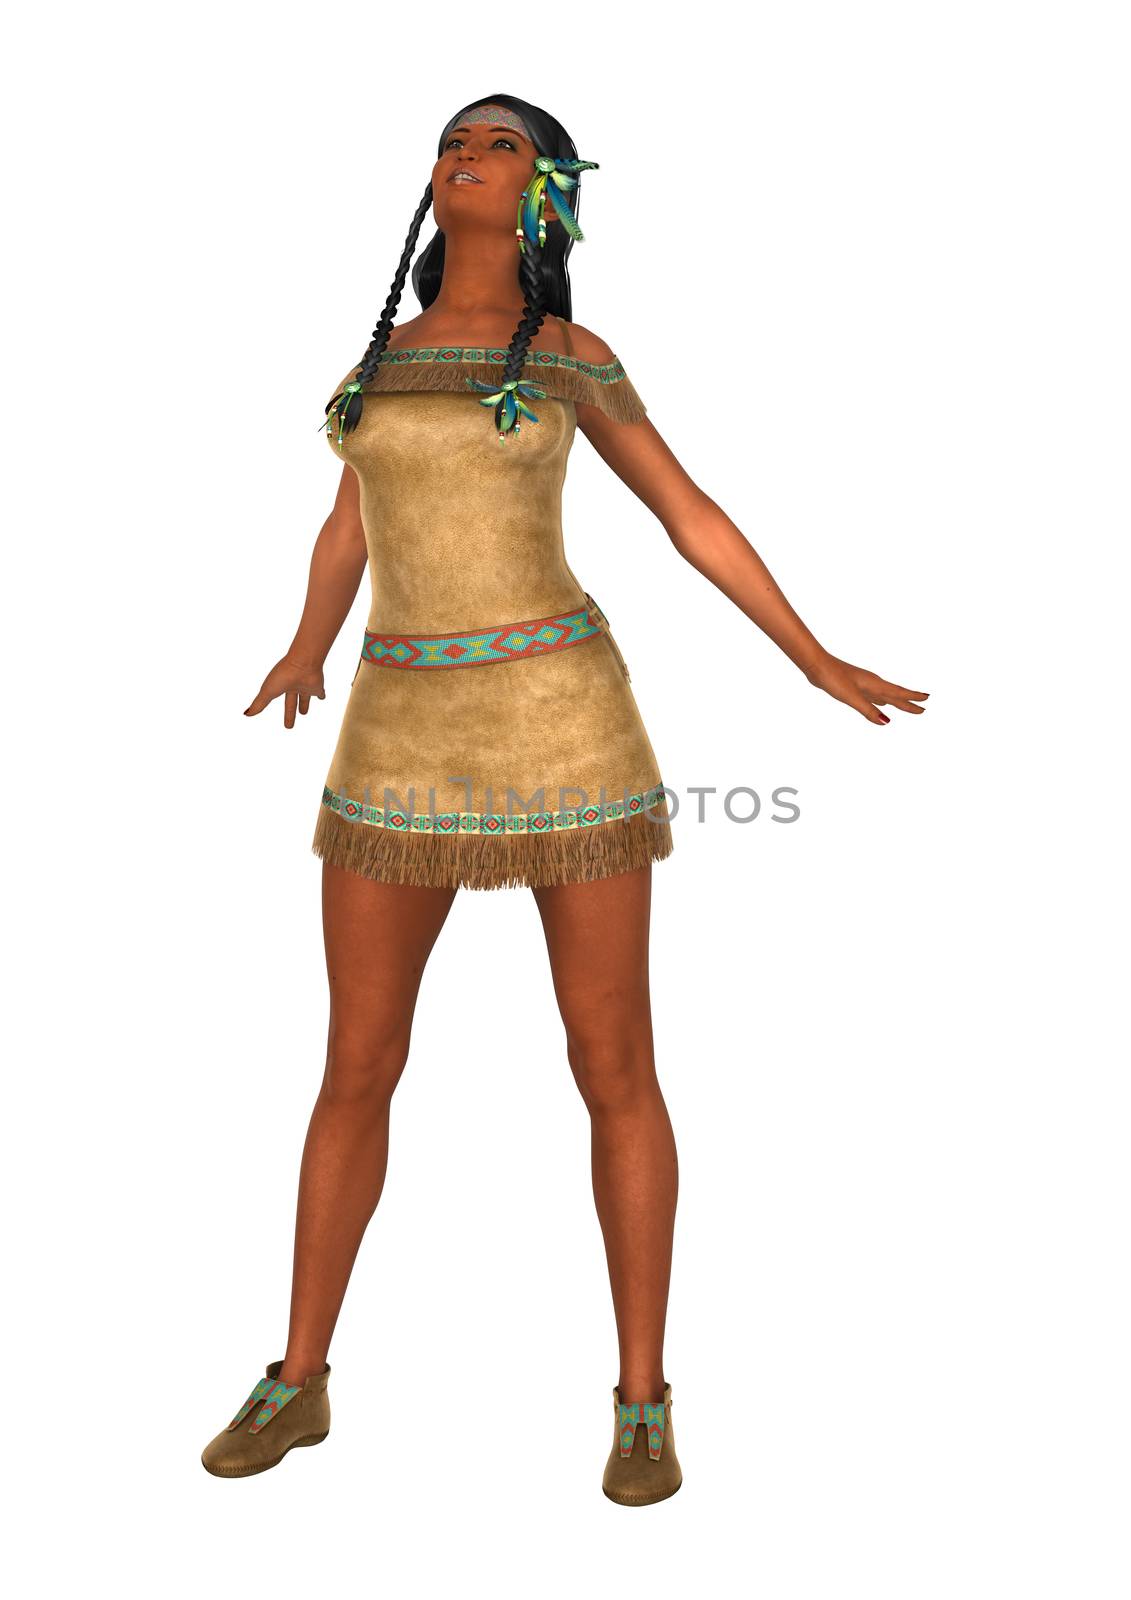 3D digital render of a native American woman isolated on white background